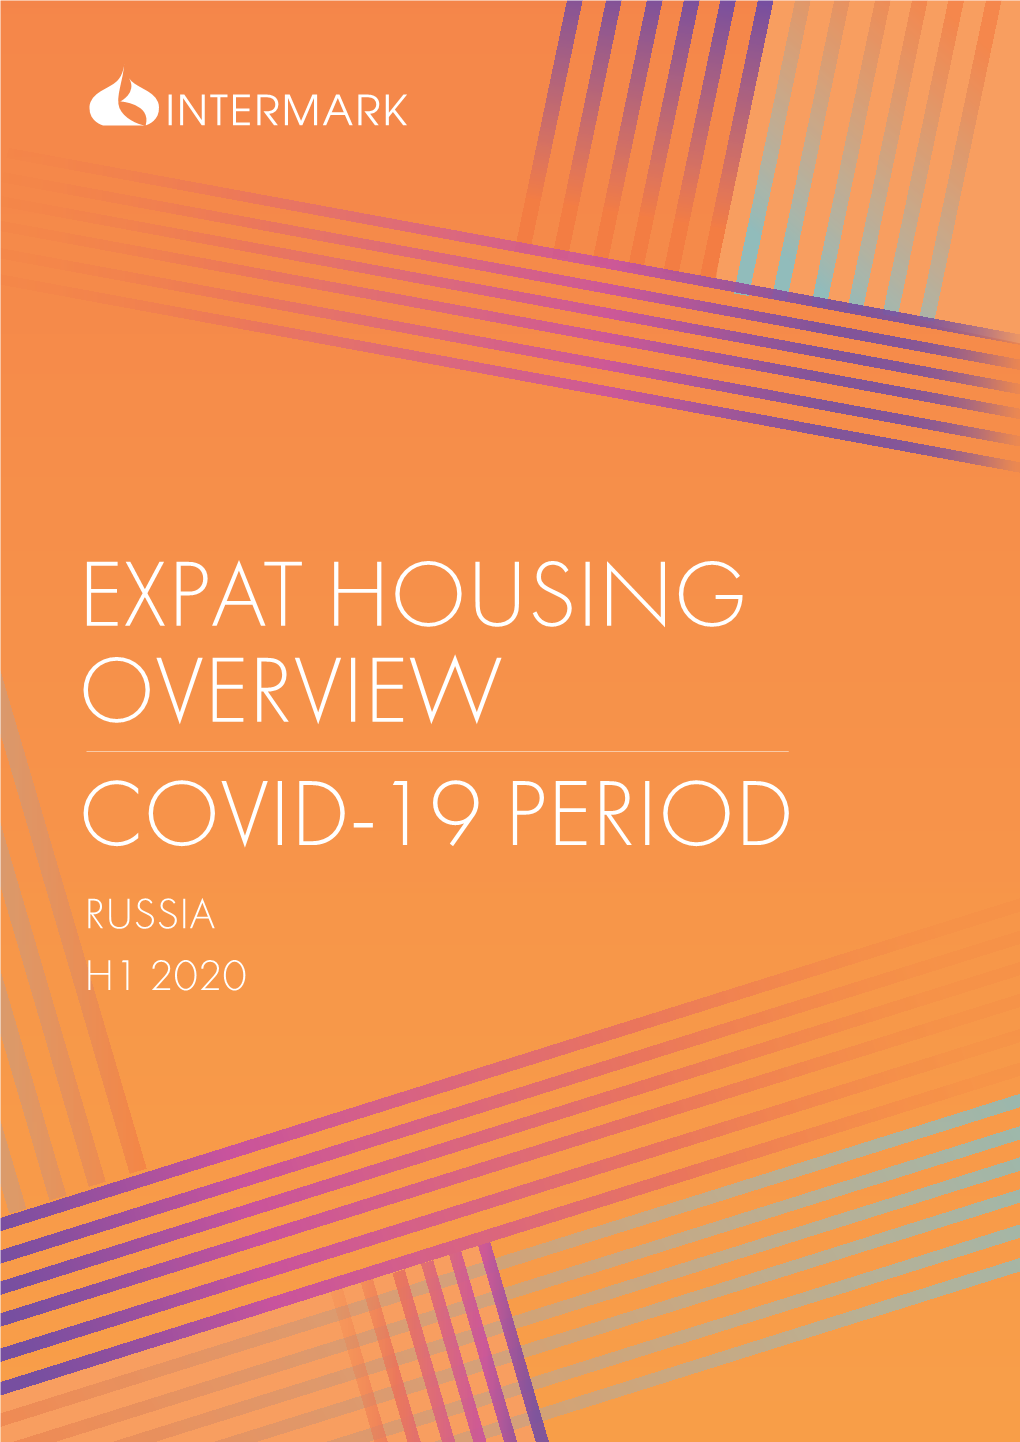 Expat Housing Overview. COVID-19 Period